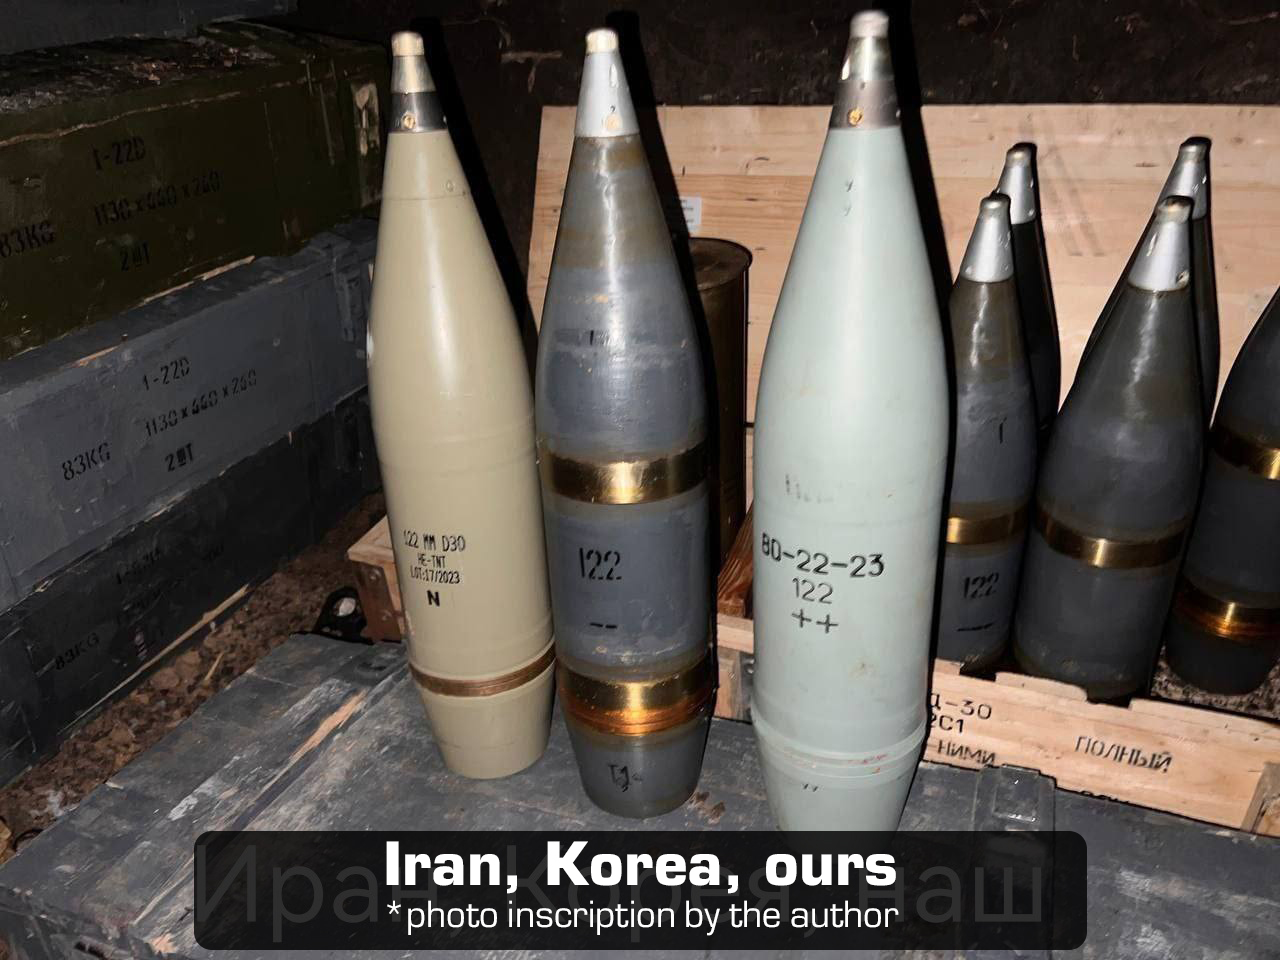 Comparison of artillery shells supplied to the russian units fighting against Ukraine. Left to right: Iranian-, North Korean-, and russian-made rounds